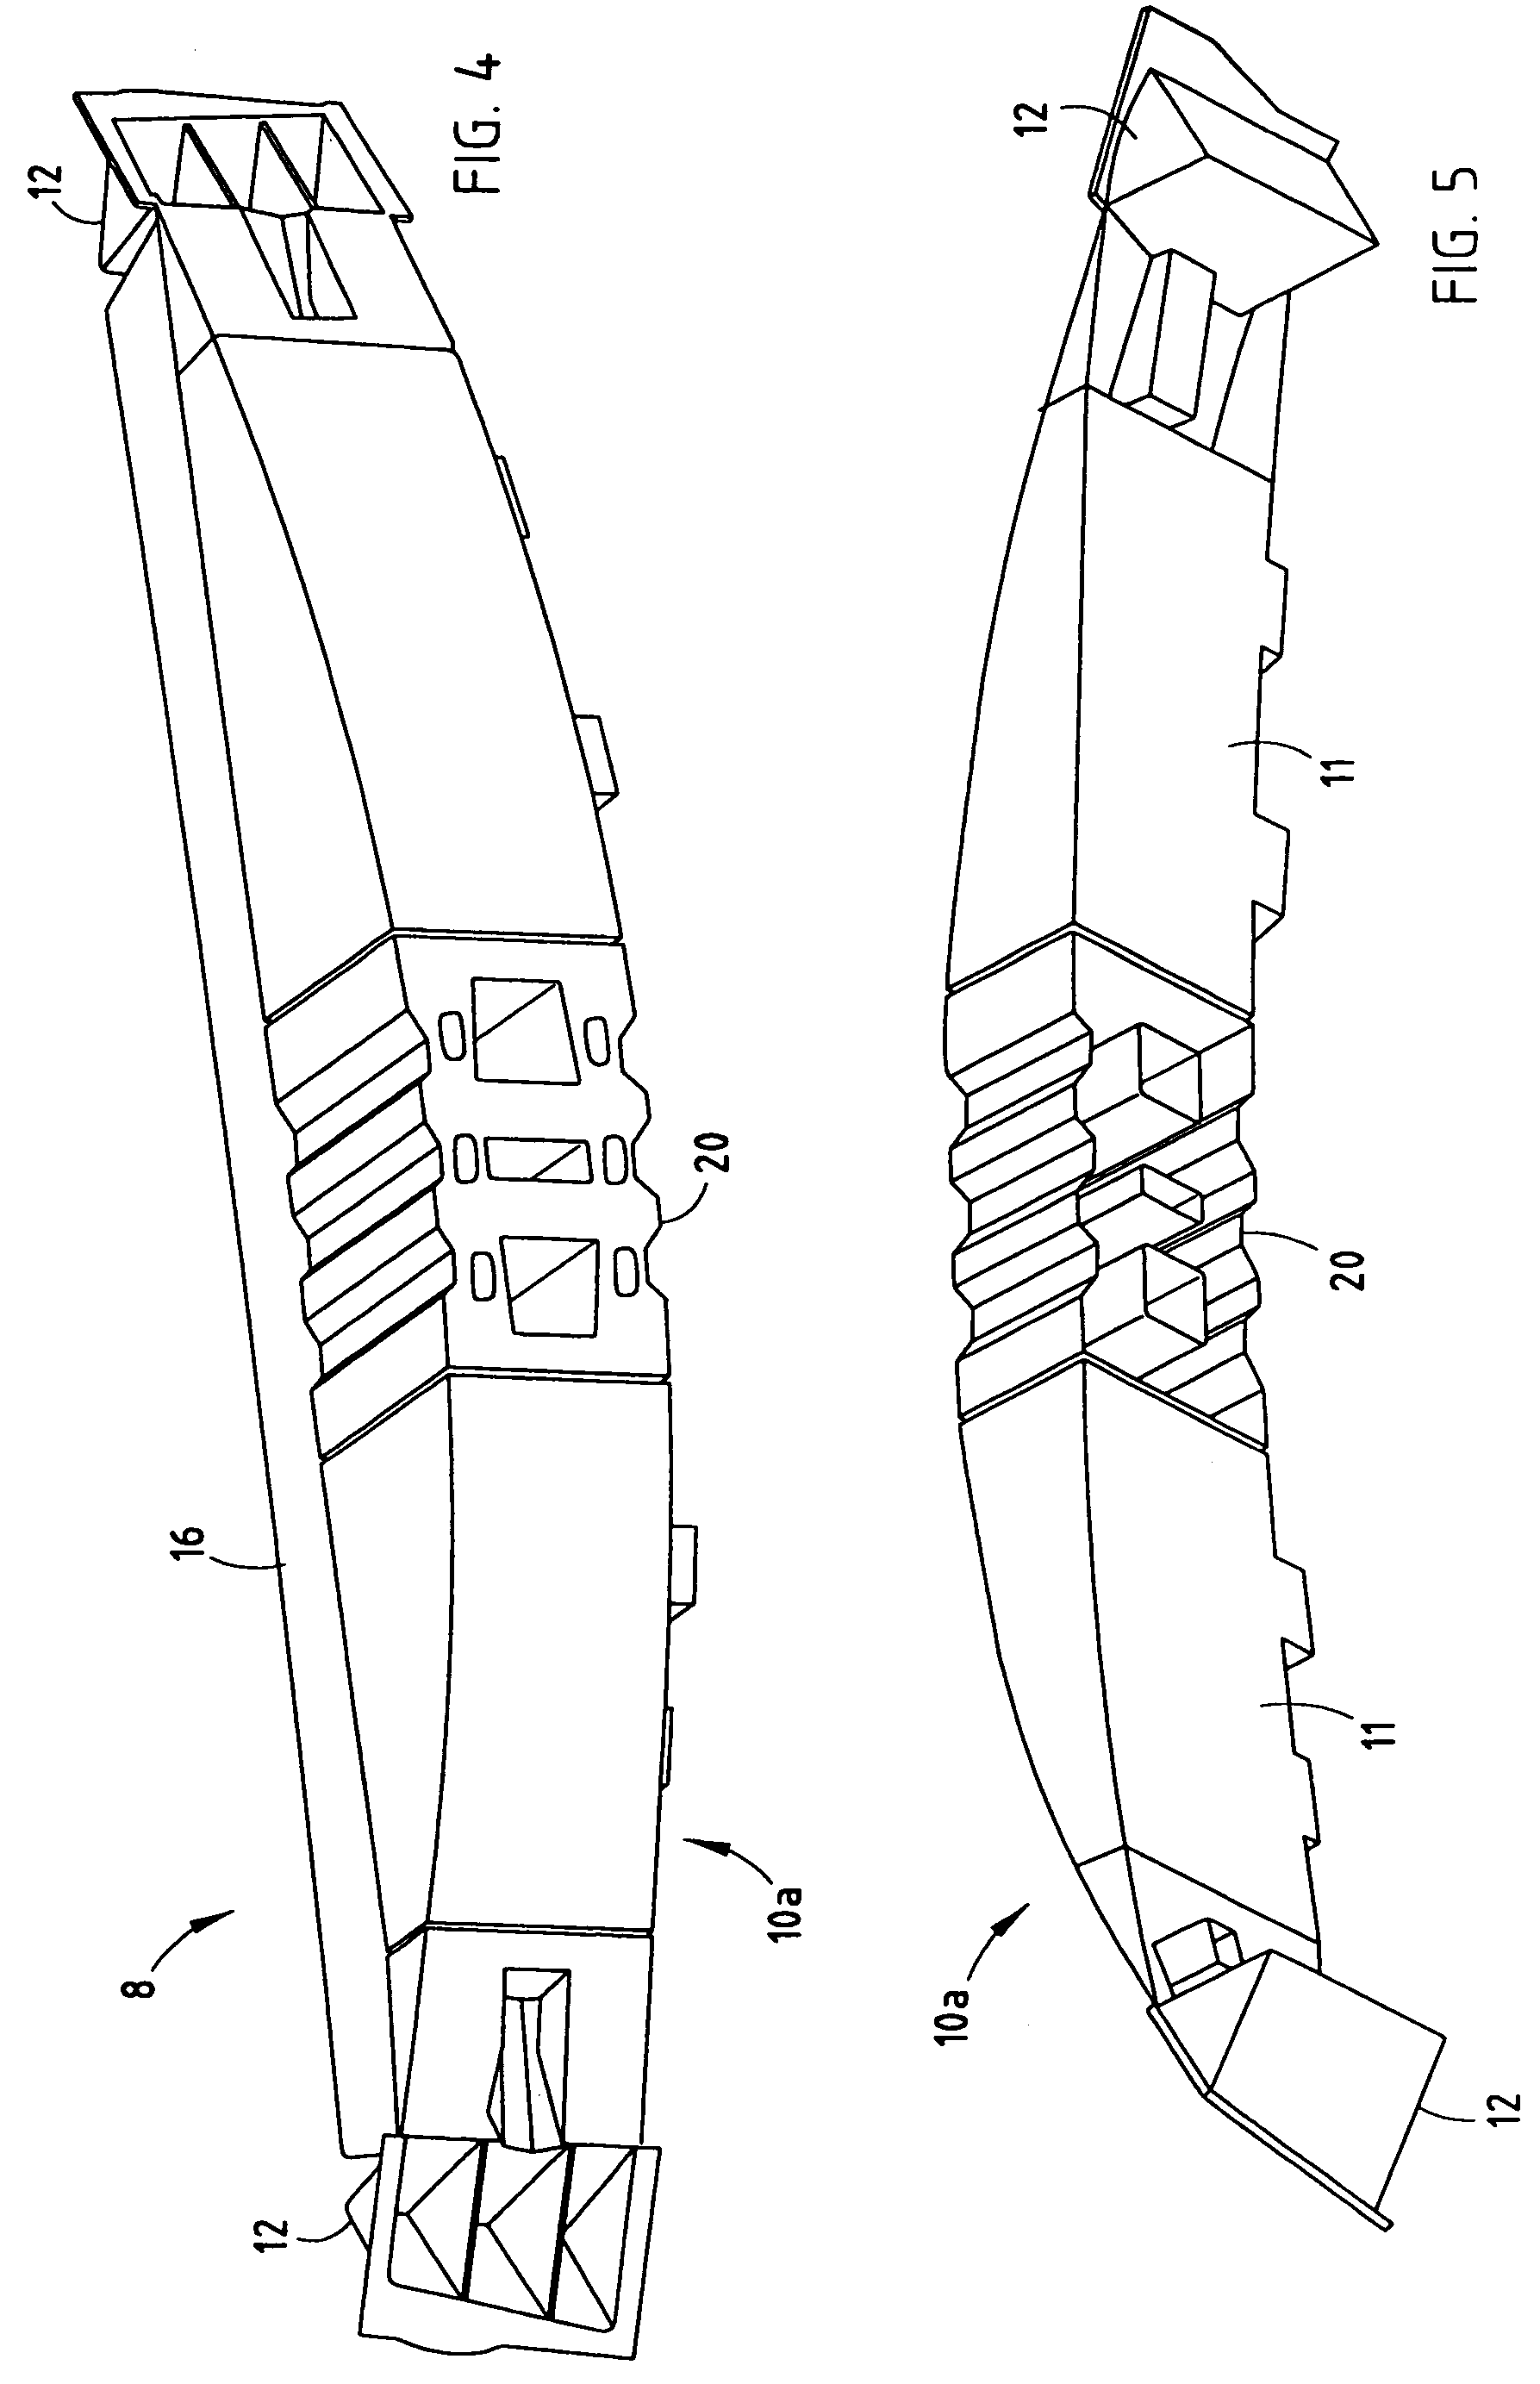 Bumper system with energy absorber